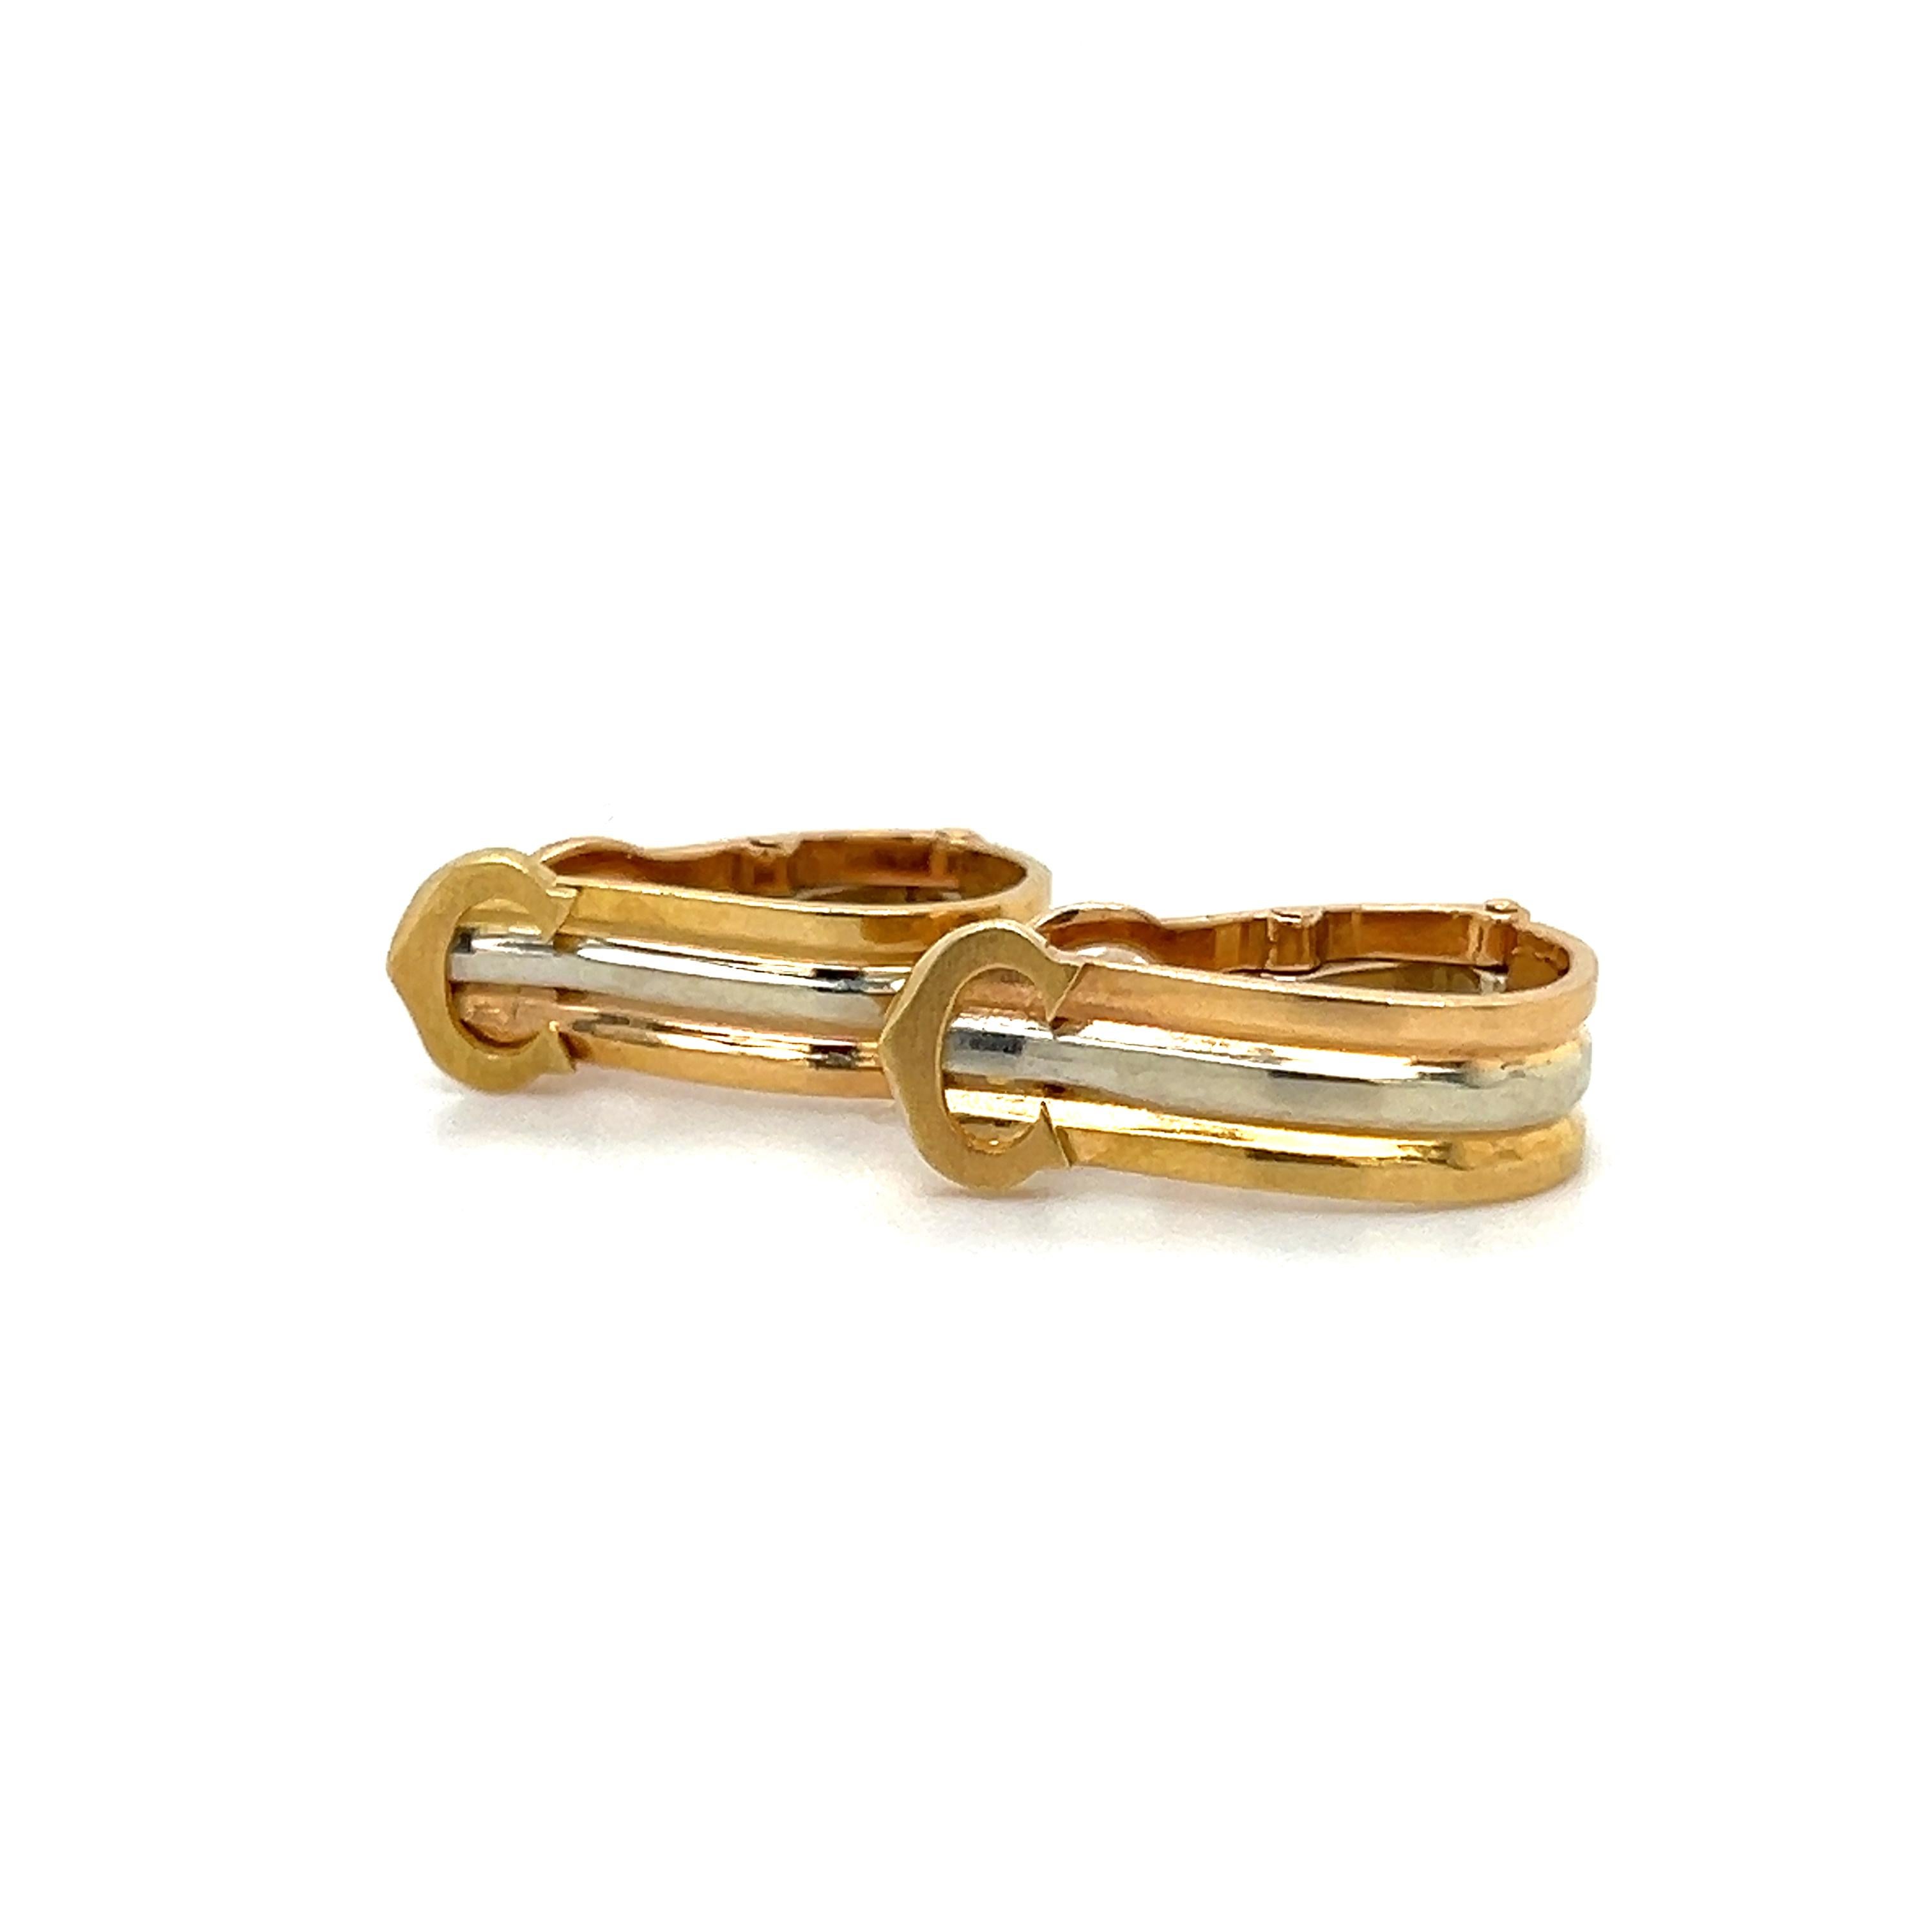 Elegant pair of vintage Cartier huggie style hoop earrings. The pair are from the trinity collection as they display a tri color gold finish. the pair is highlighted with the Cartier iconic 